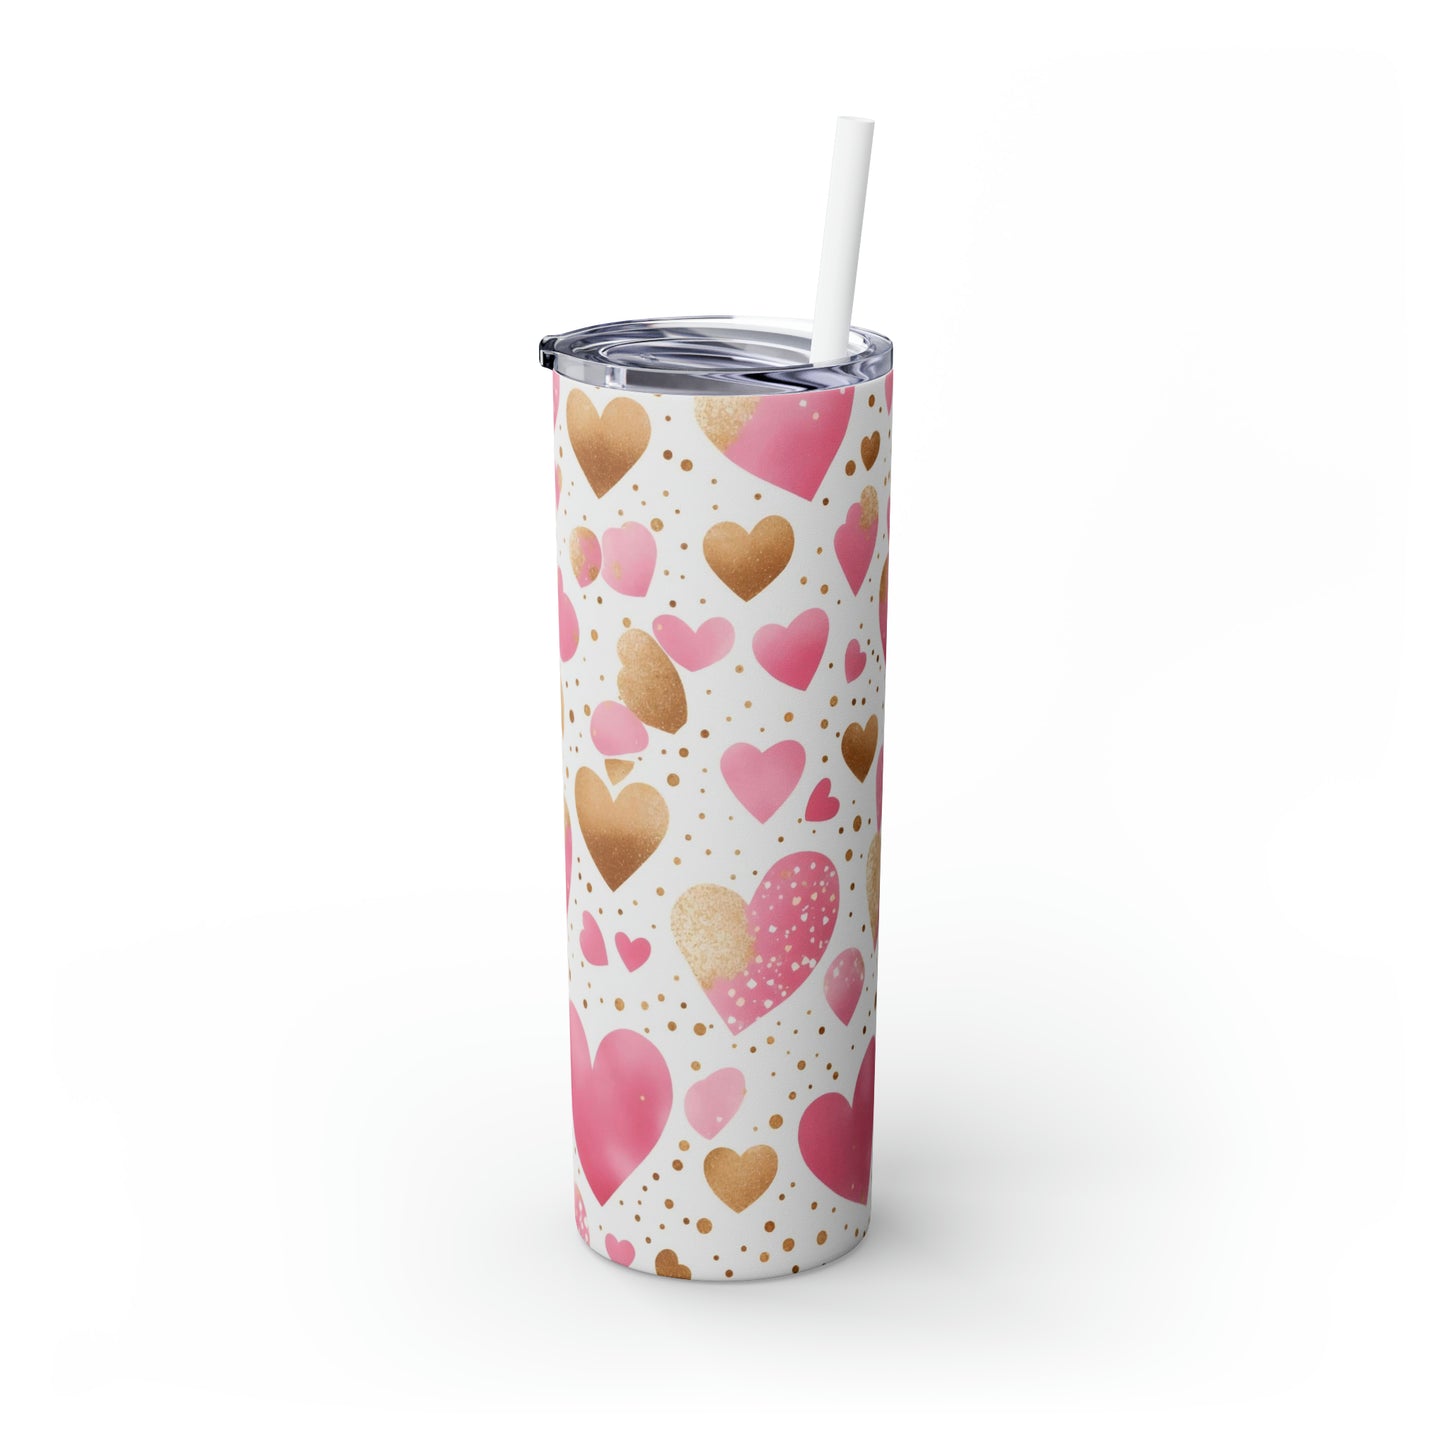 Love Hearts - Pink and Gold Floating Hearts - Skinny Tumbler with Straw, 20oz - Stainless Steel